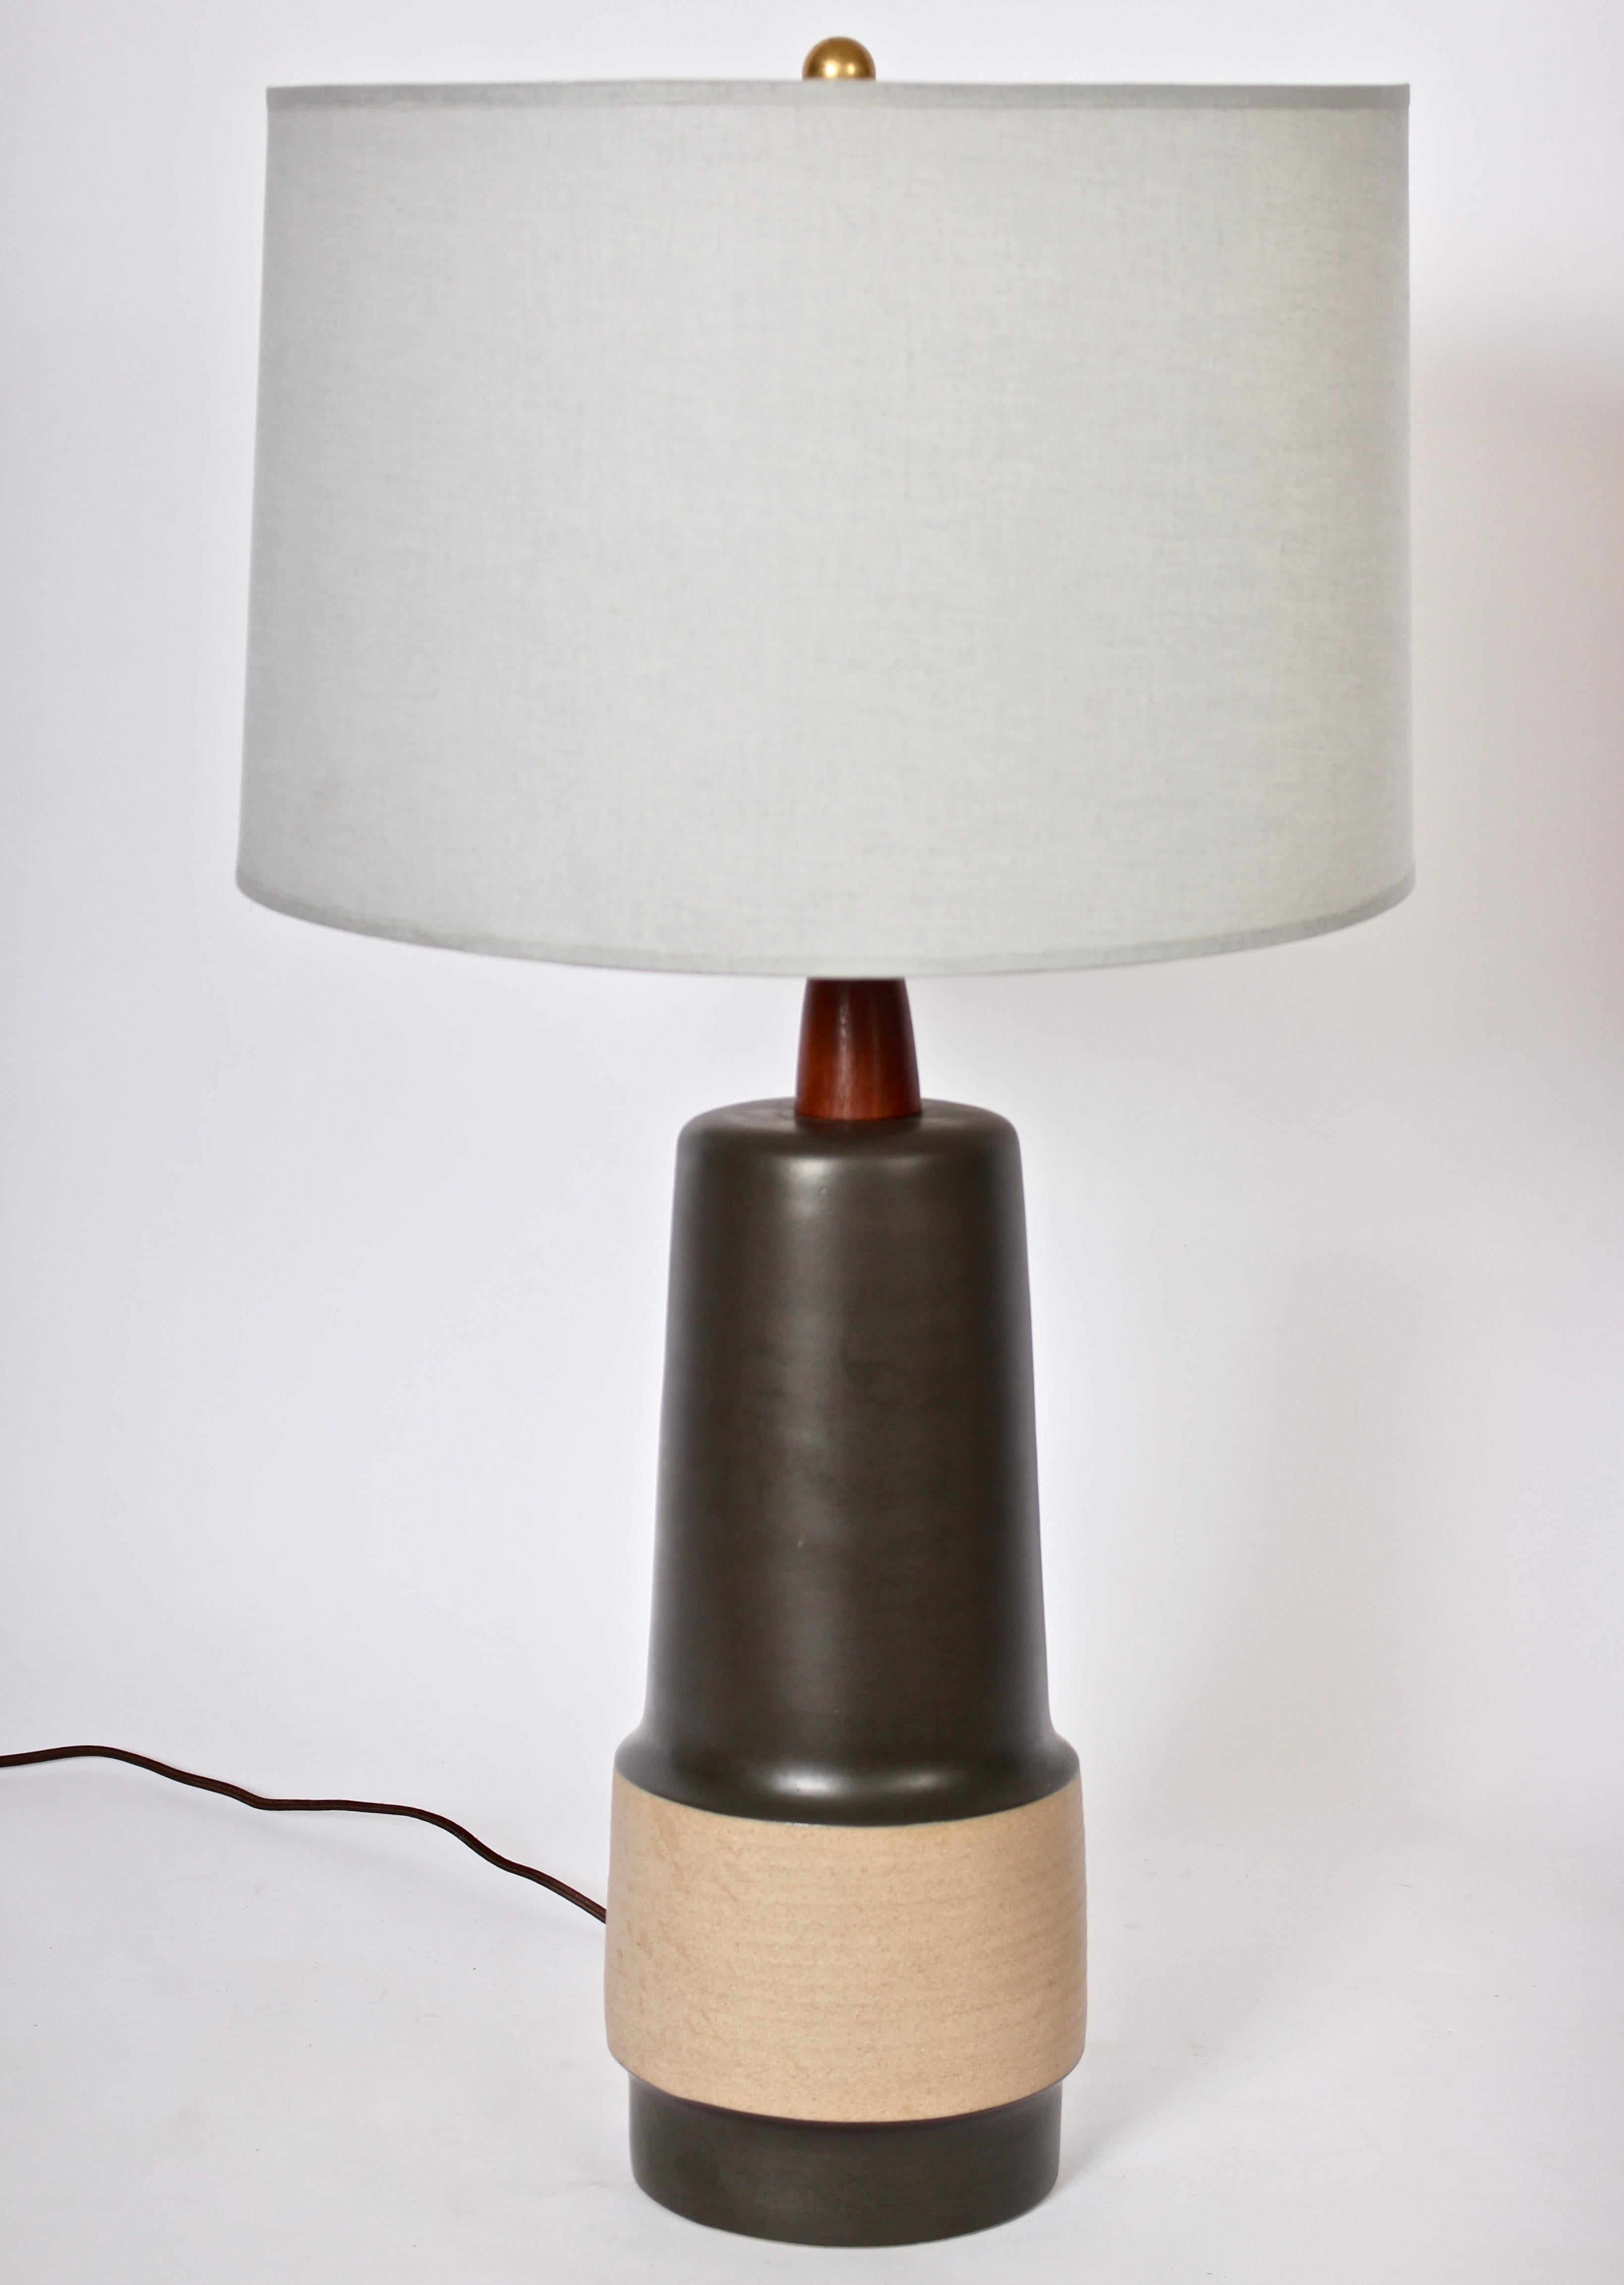 Gordon & Jane Martz Marshall Studios M144-45-D103A glazed stoneware table lamp, 1960s. In matte black with neutral Beige incised waist and turned wooden neck. 21H to top of socket. Ceramic 15H. Shade shown for display only (11H x 15D top x 16D